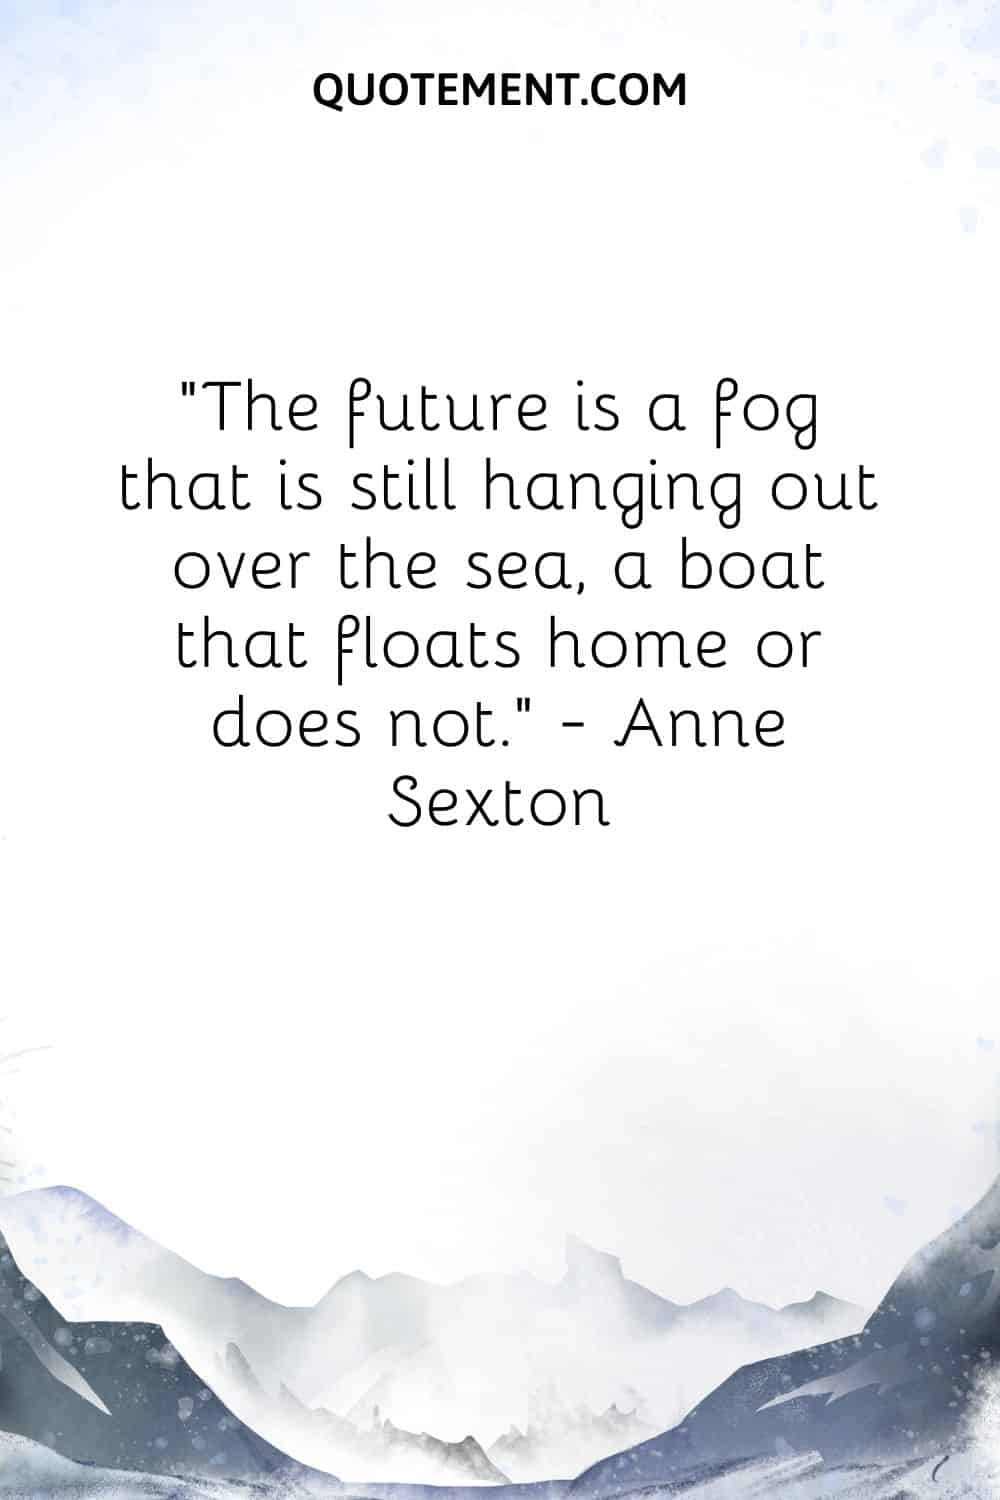 The future is a fog that is still hanging out over the sea, a boat that floats home or does not